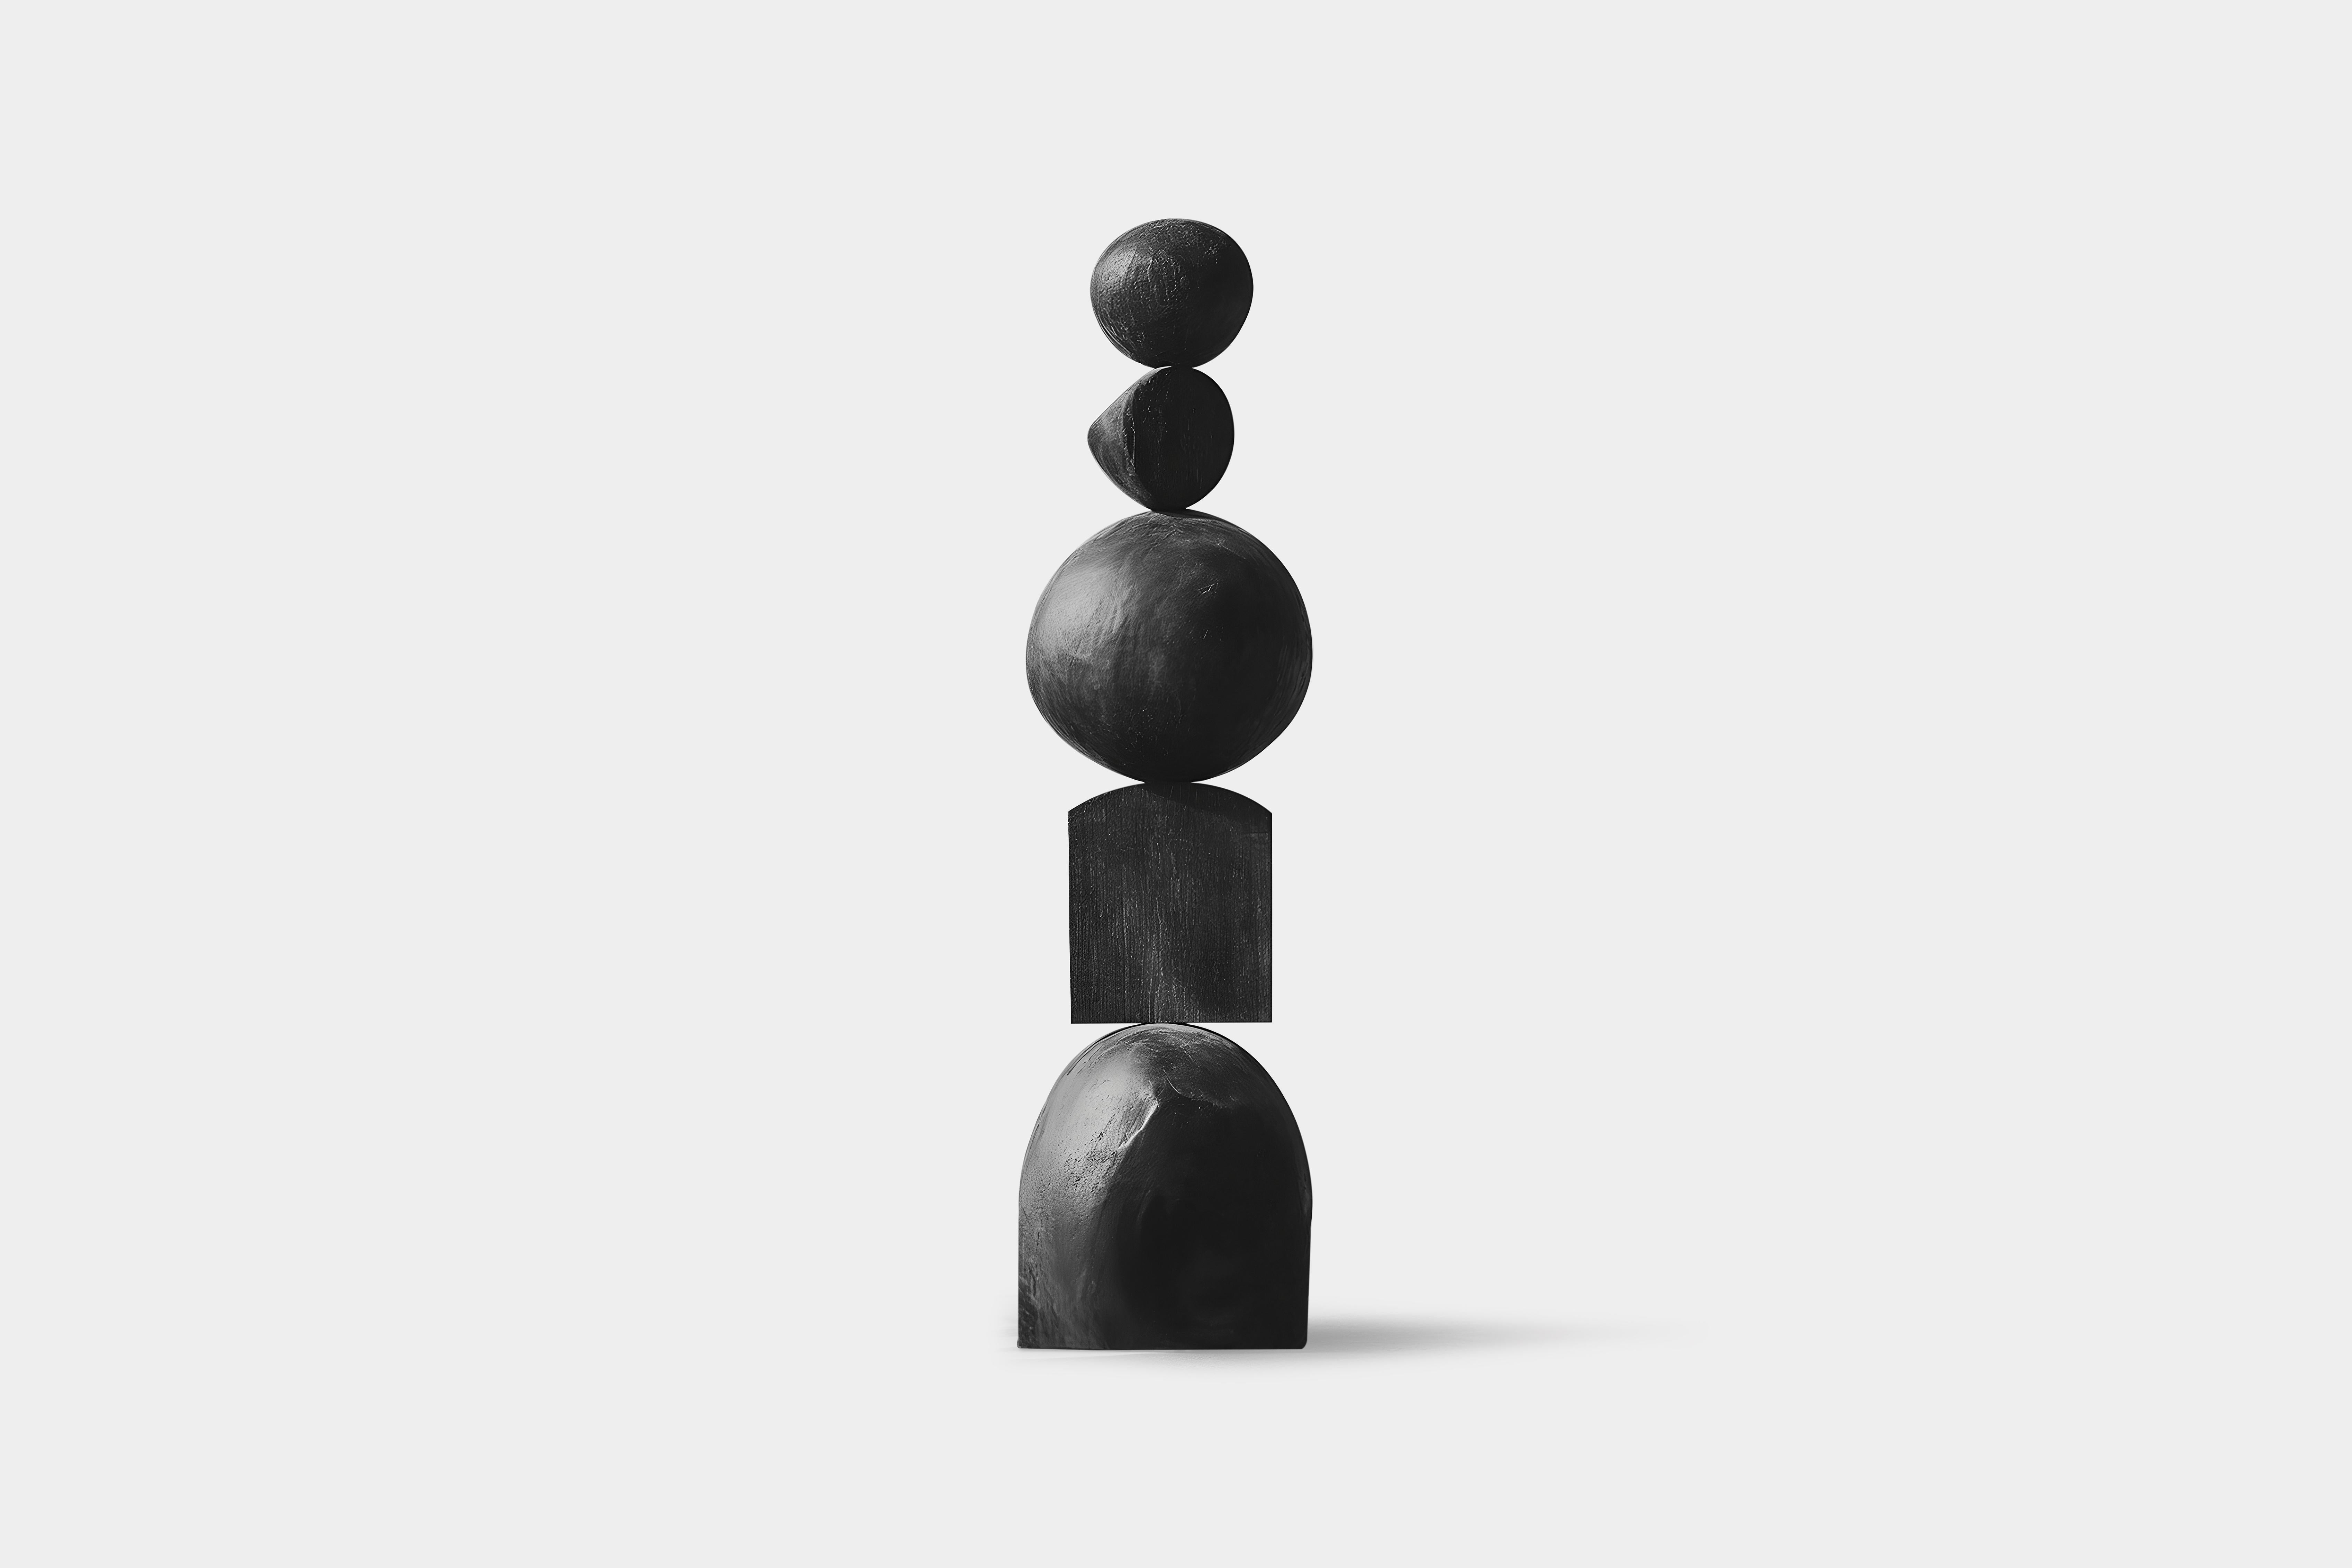 Carved Elegance, Black Solid Wood Still Stand No80 by NONO
——


Joel Escalona's wooden standing sculptures are objects of raw beauty and serene grace. Each one is a testament to the power of the material, with smooth curves that flow into one